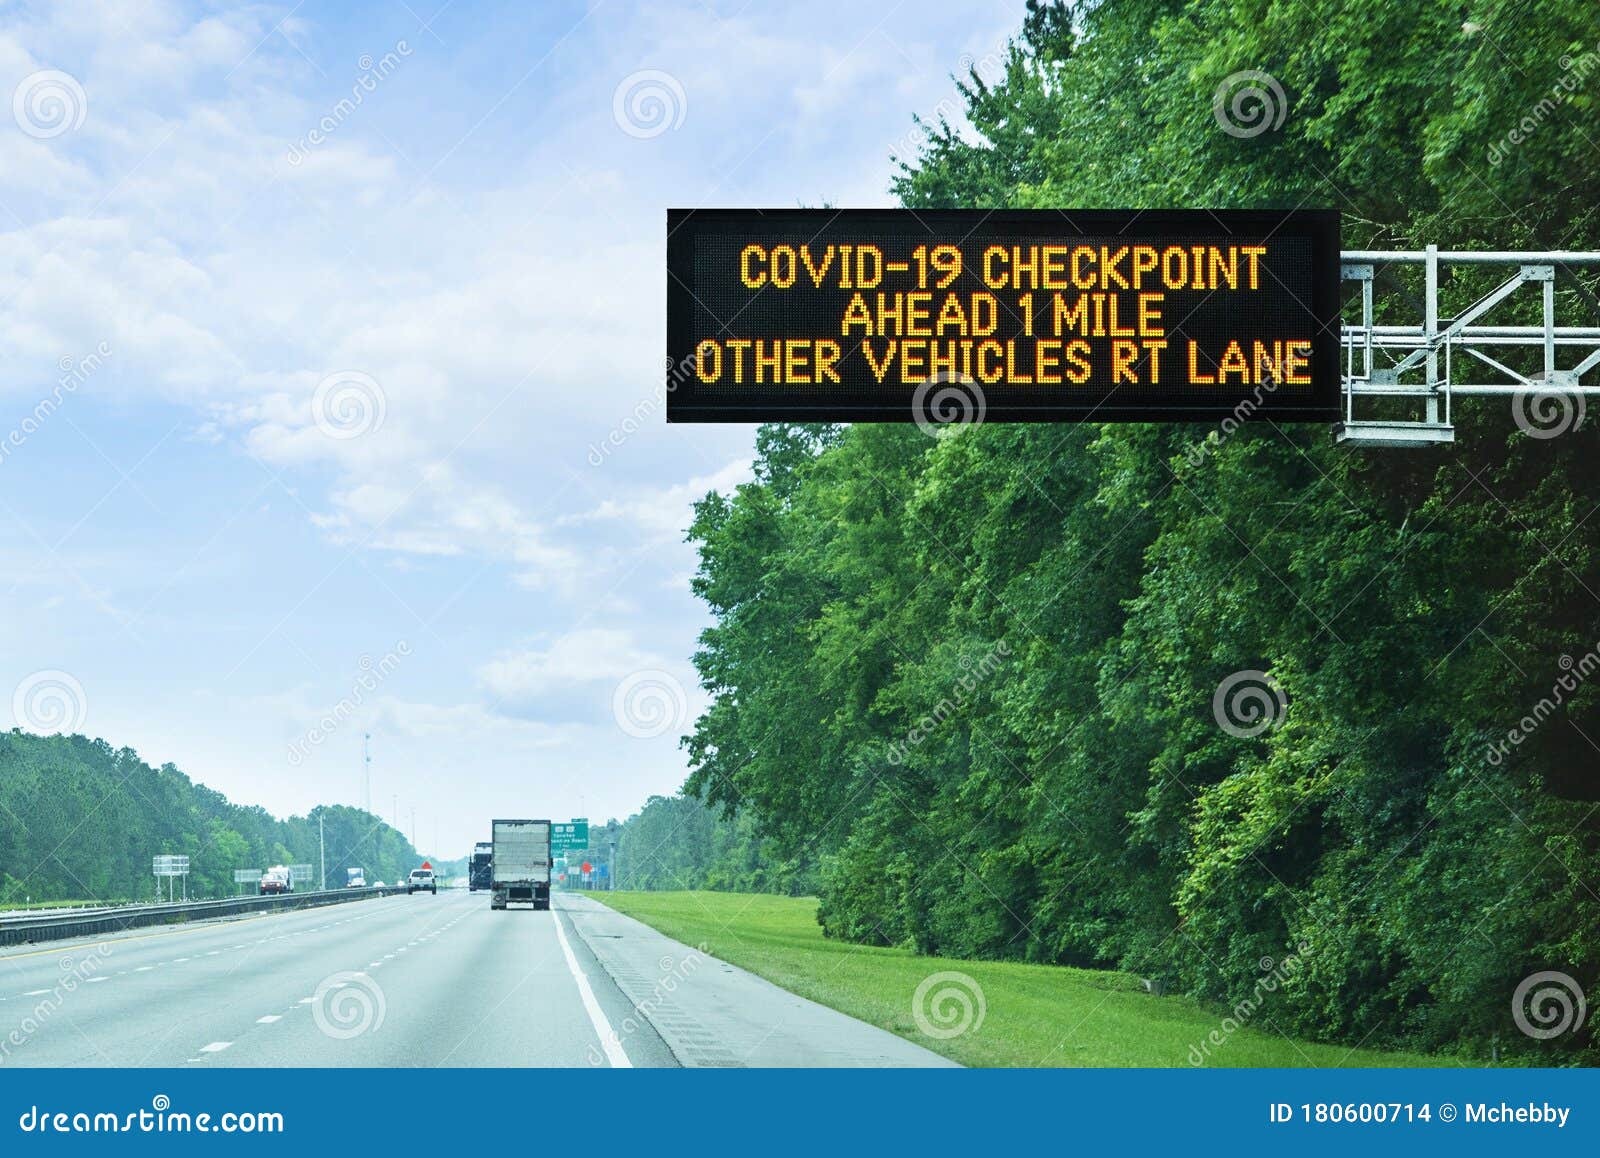 highway alert: covid-19 checkpoint ahead, overhead sign in florida on state border